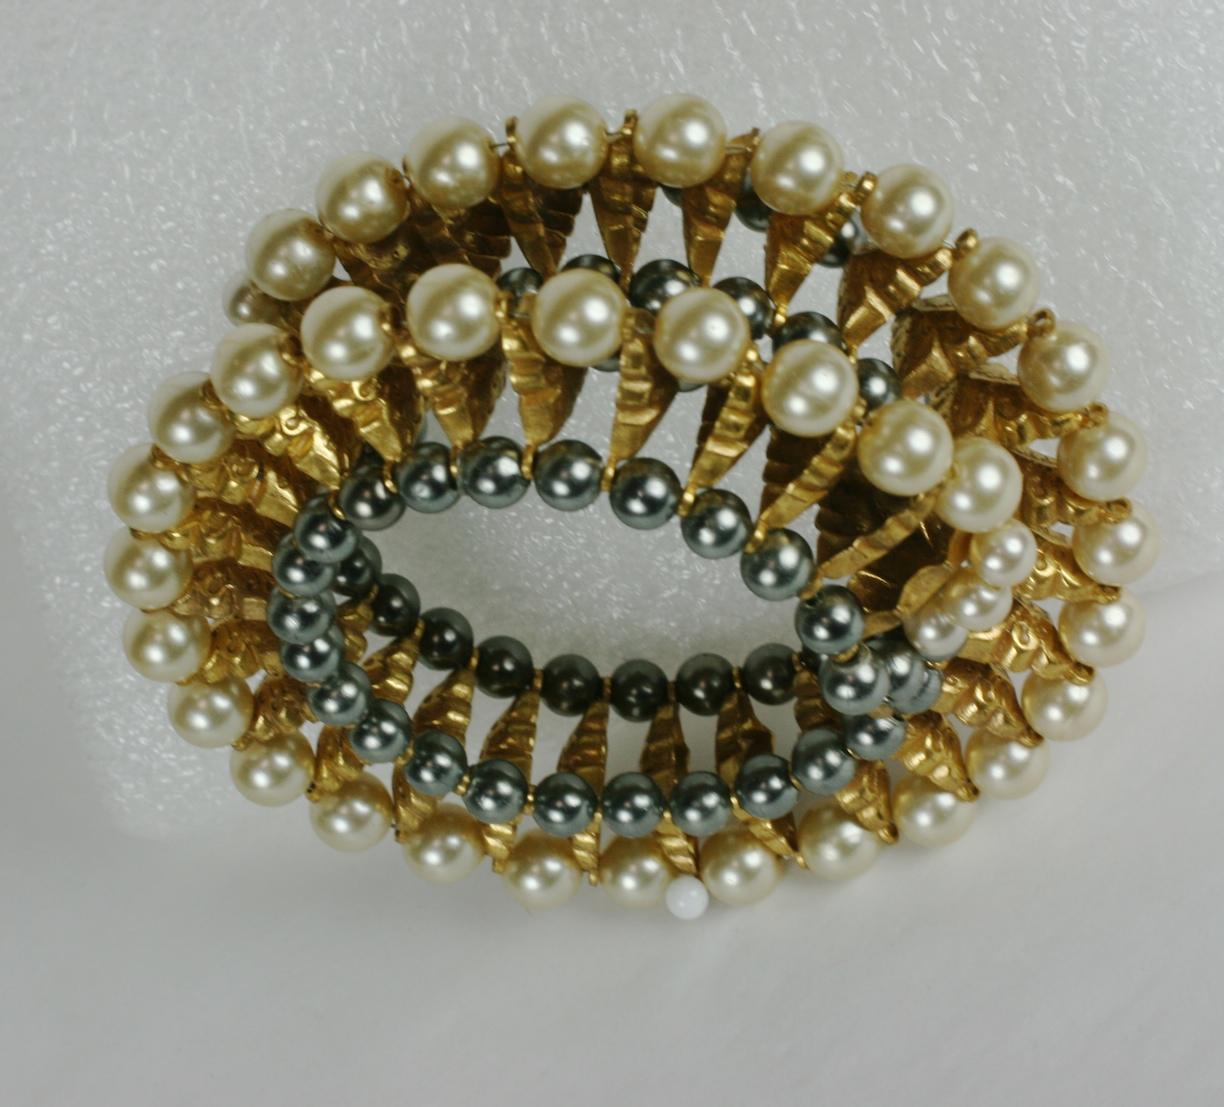 Francis Winter Victorian Revival Coiled Bracelet In Excellent Condition For Sale In New York, NY